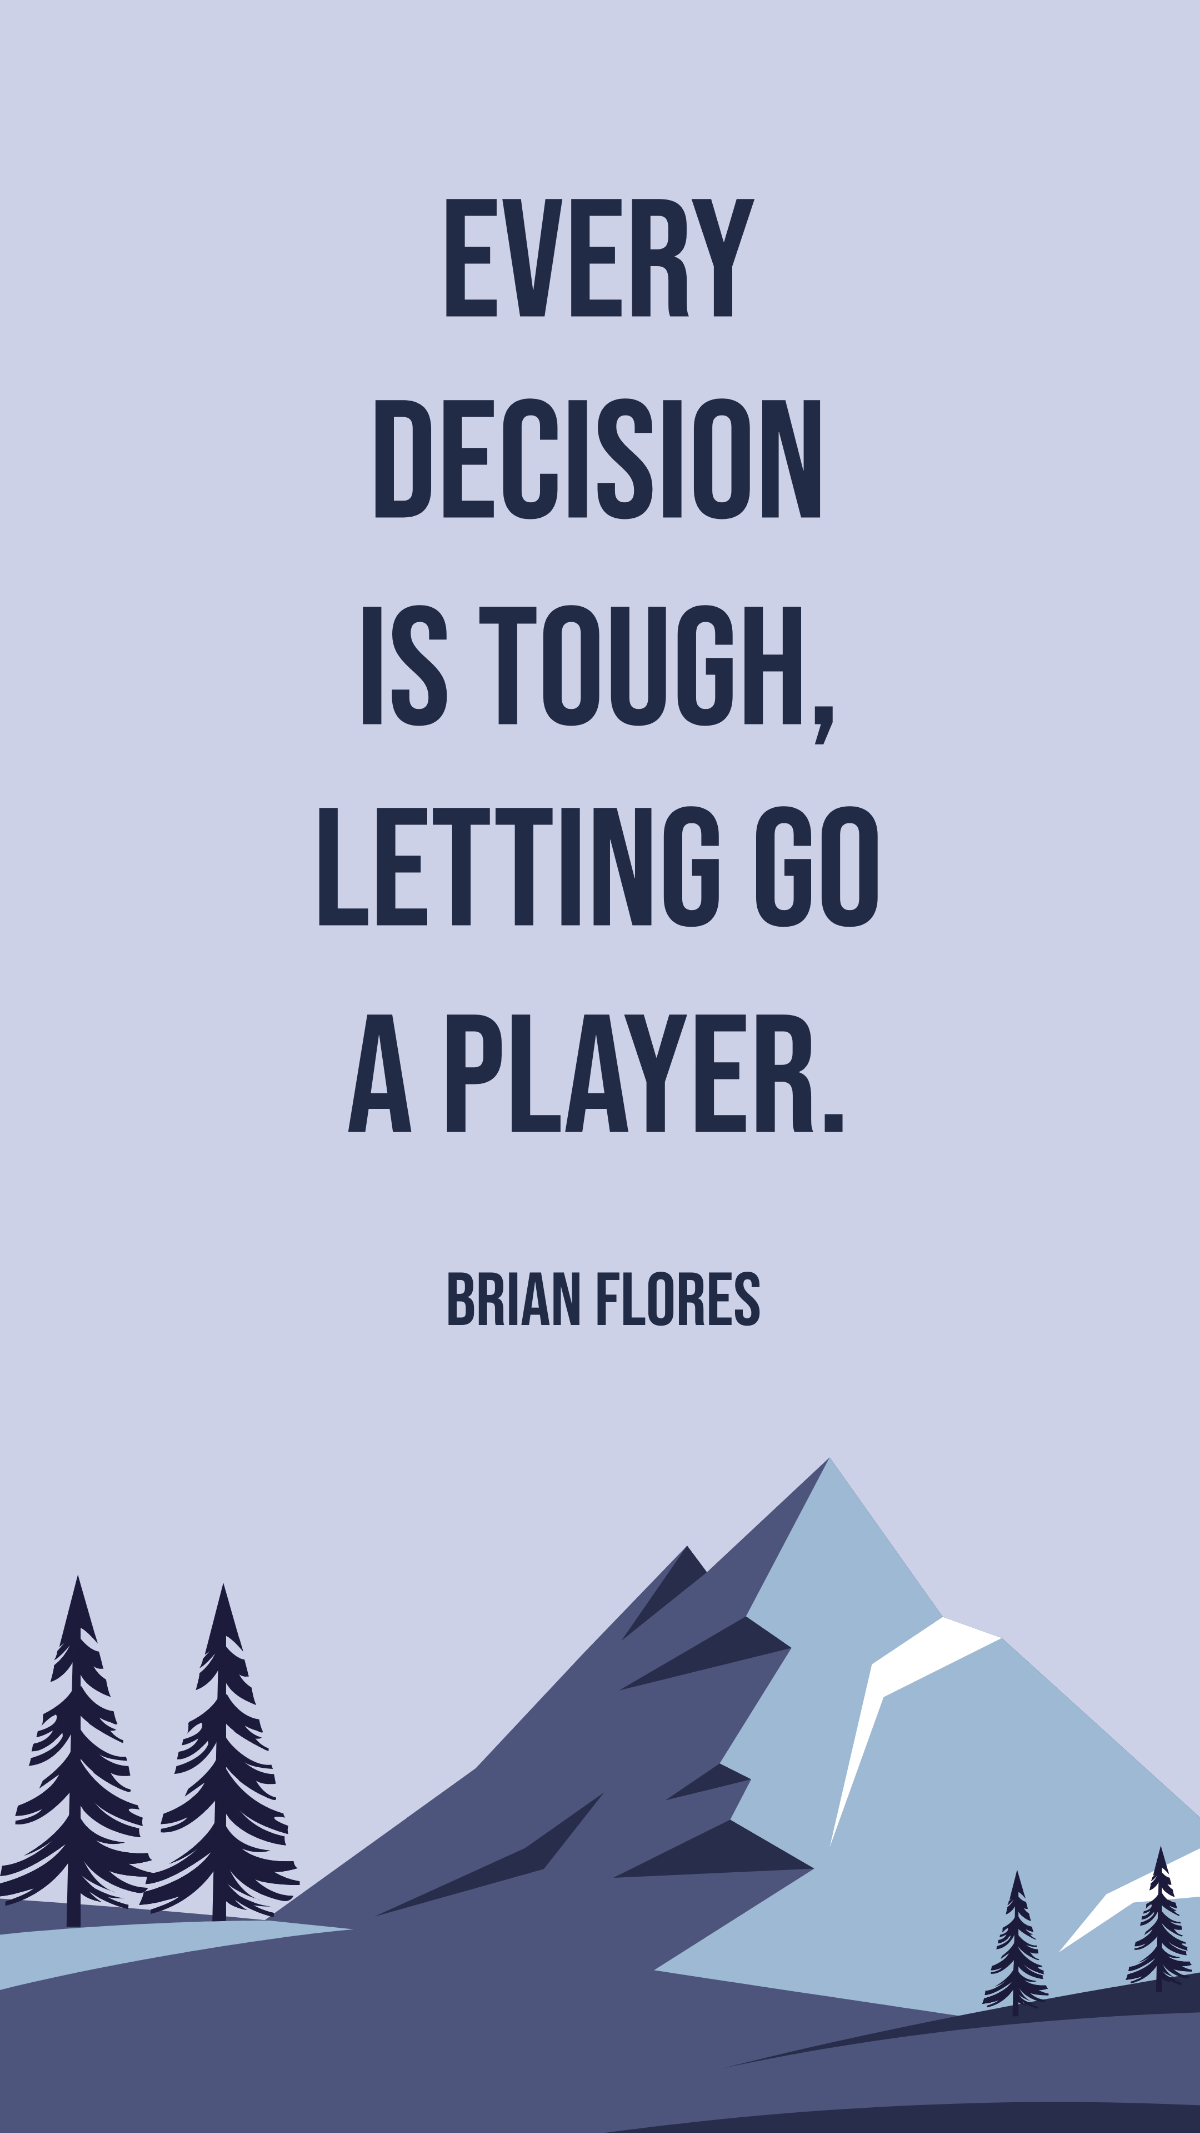 Brian Flores -Every decision is tough, letting go a player.